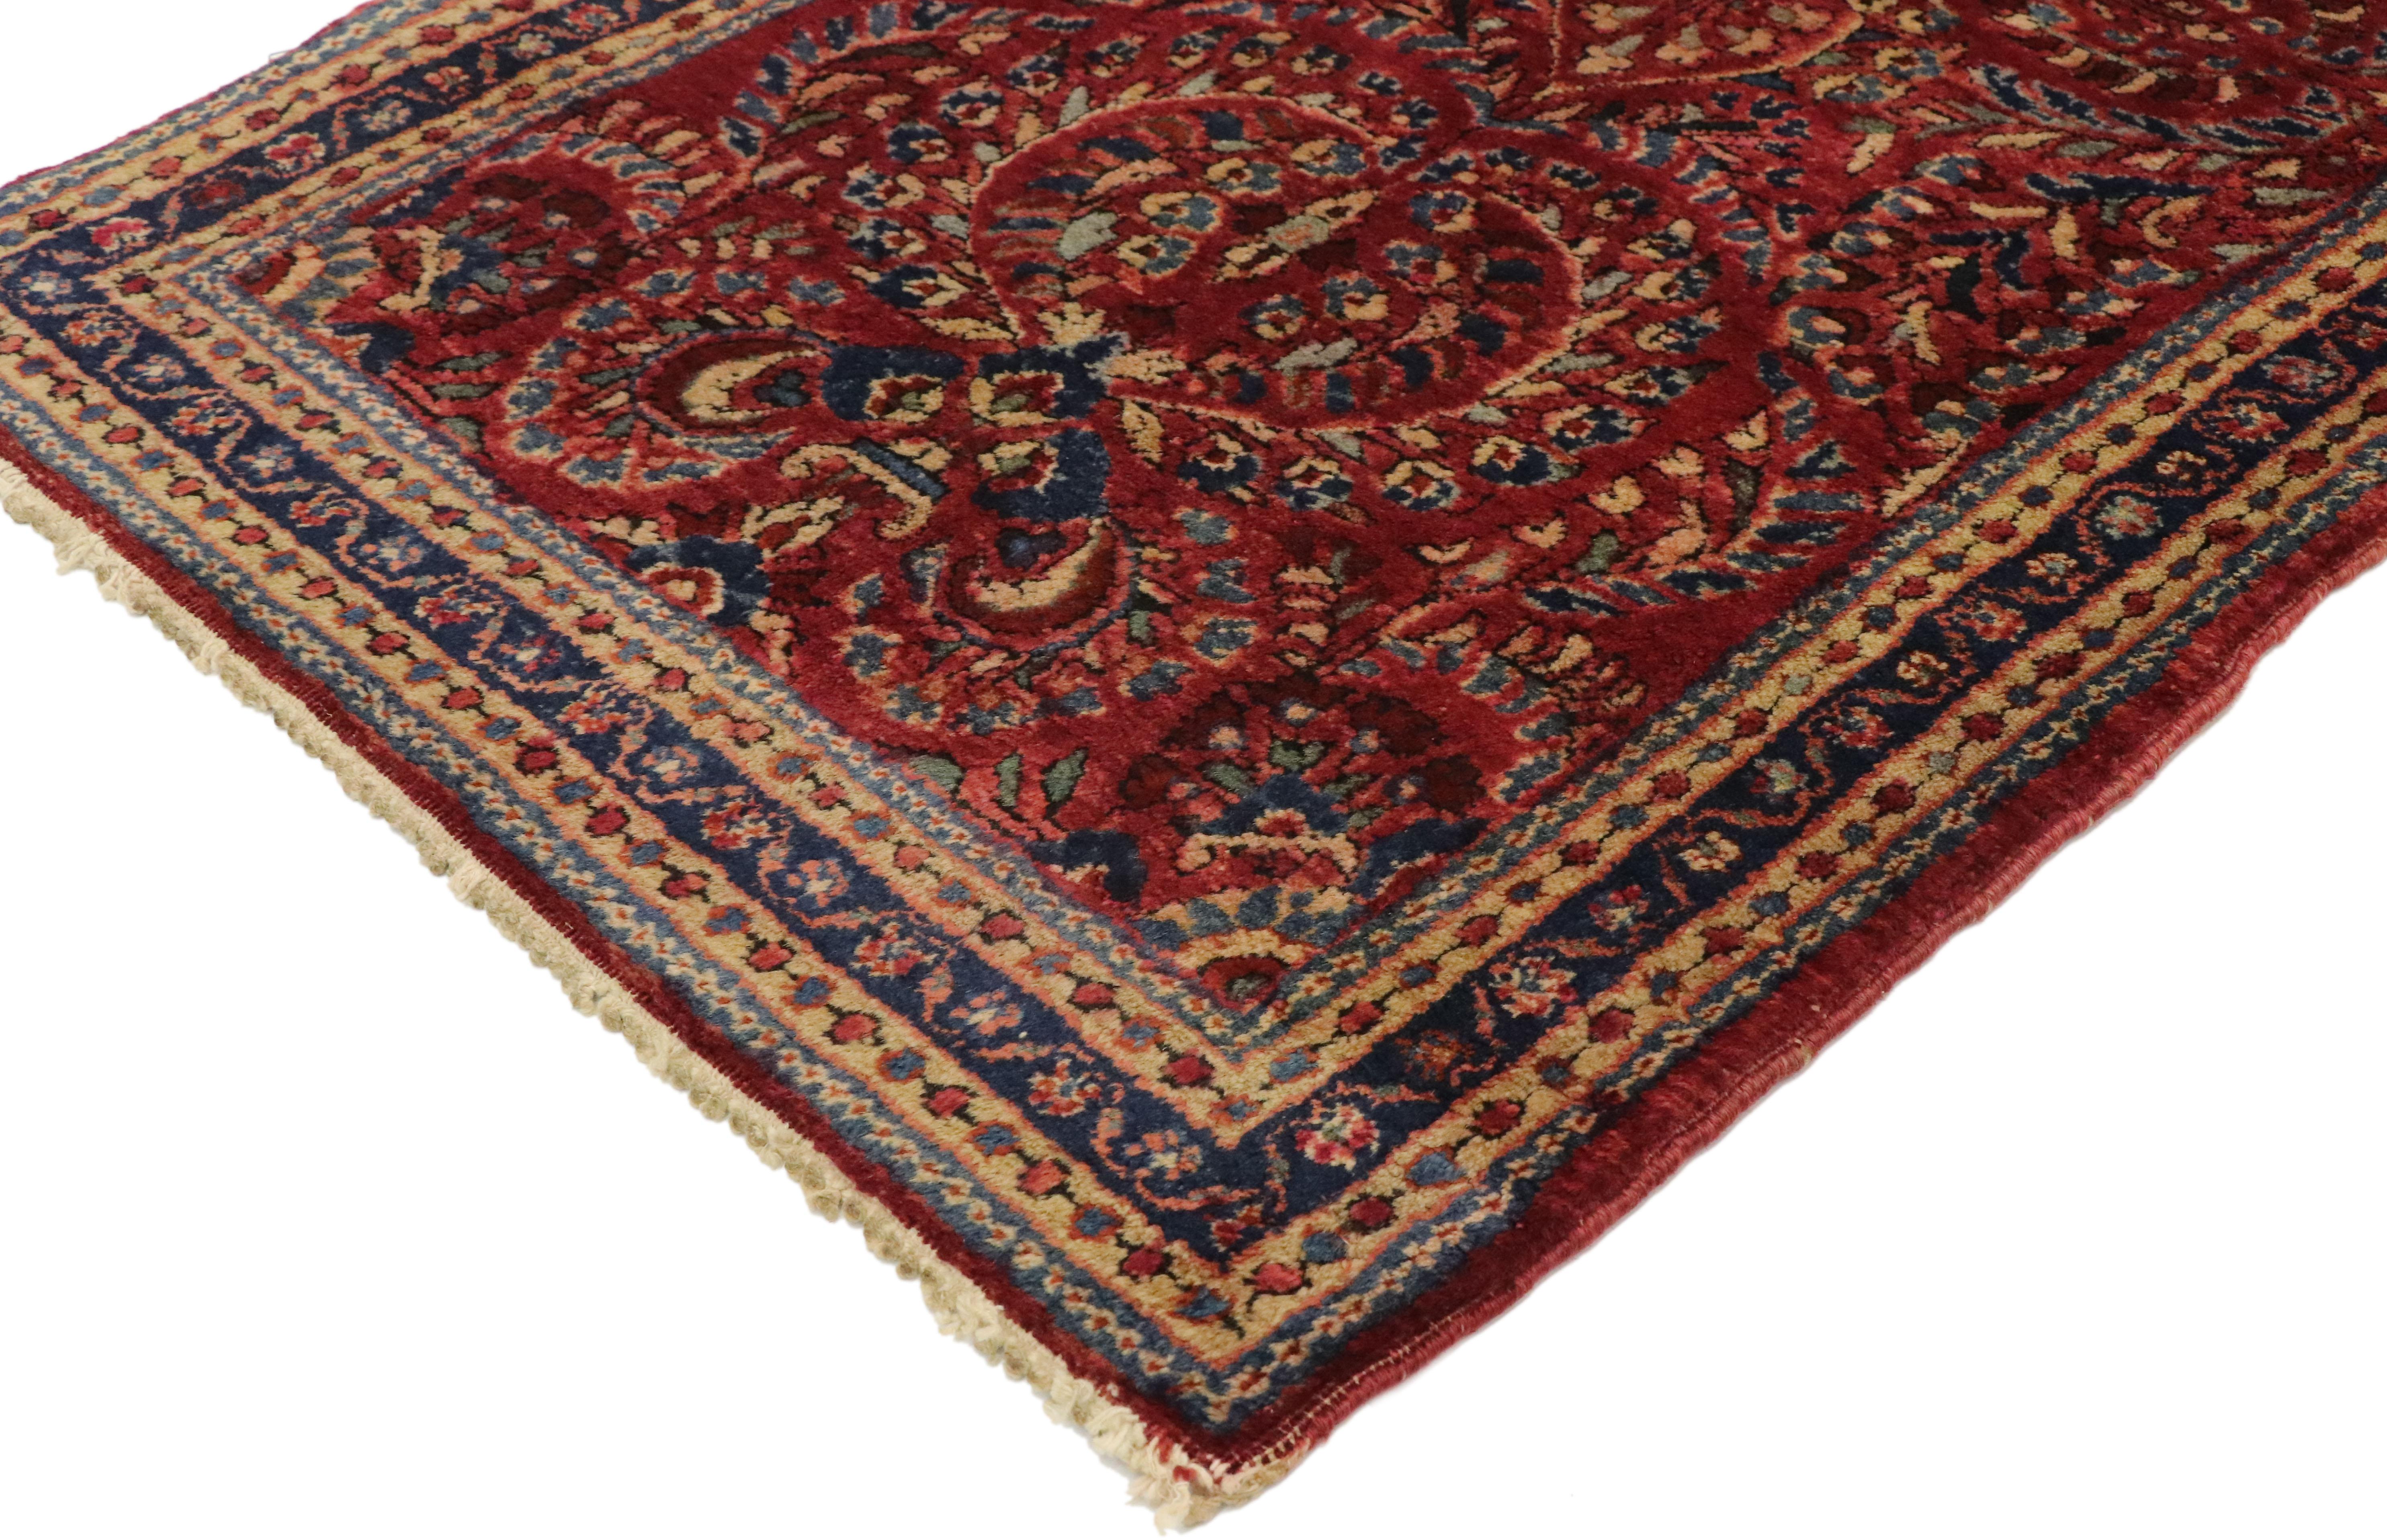 73435, Antique Persian Sarouk Rug with Traditional Art Nouveau Style. This highly desirable antique Persian Sarouk rug with Art Nouveau style features an impressive all-over floral design rendered in a rich color palette, illuminating its lively